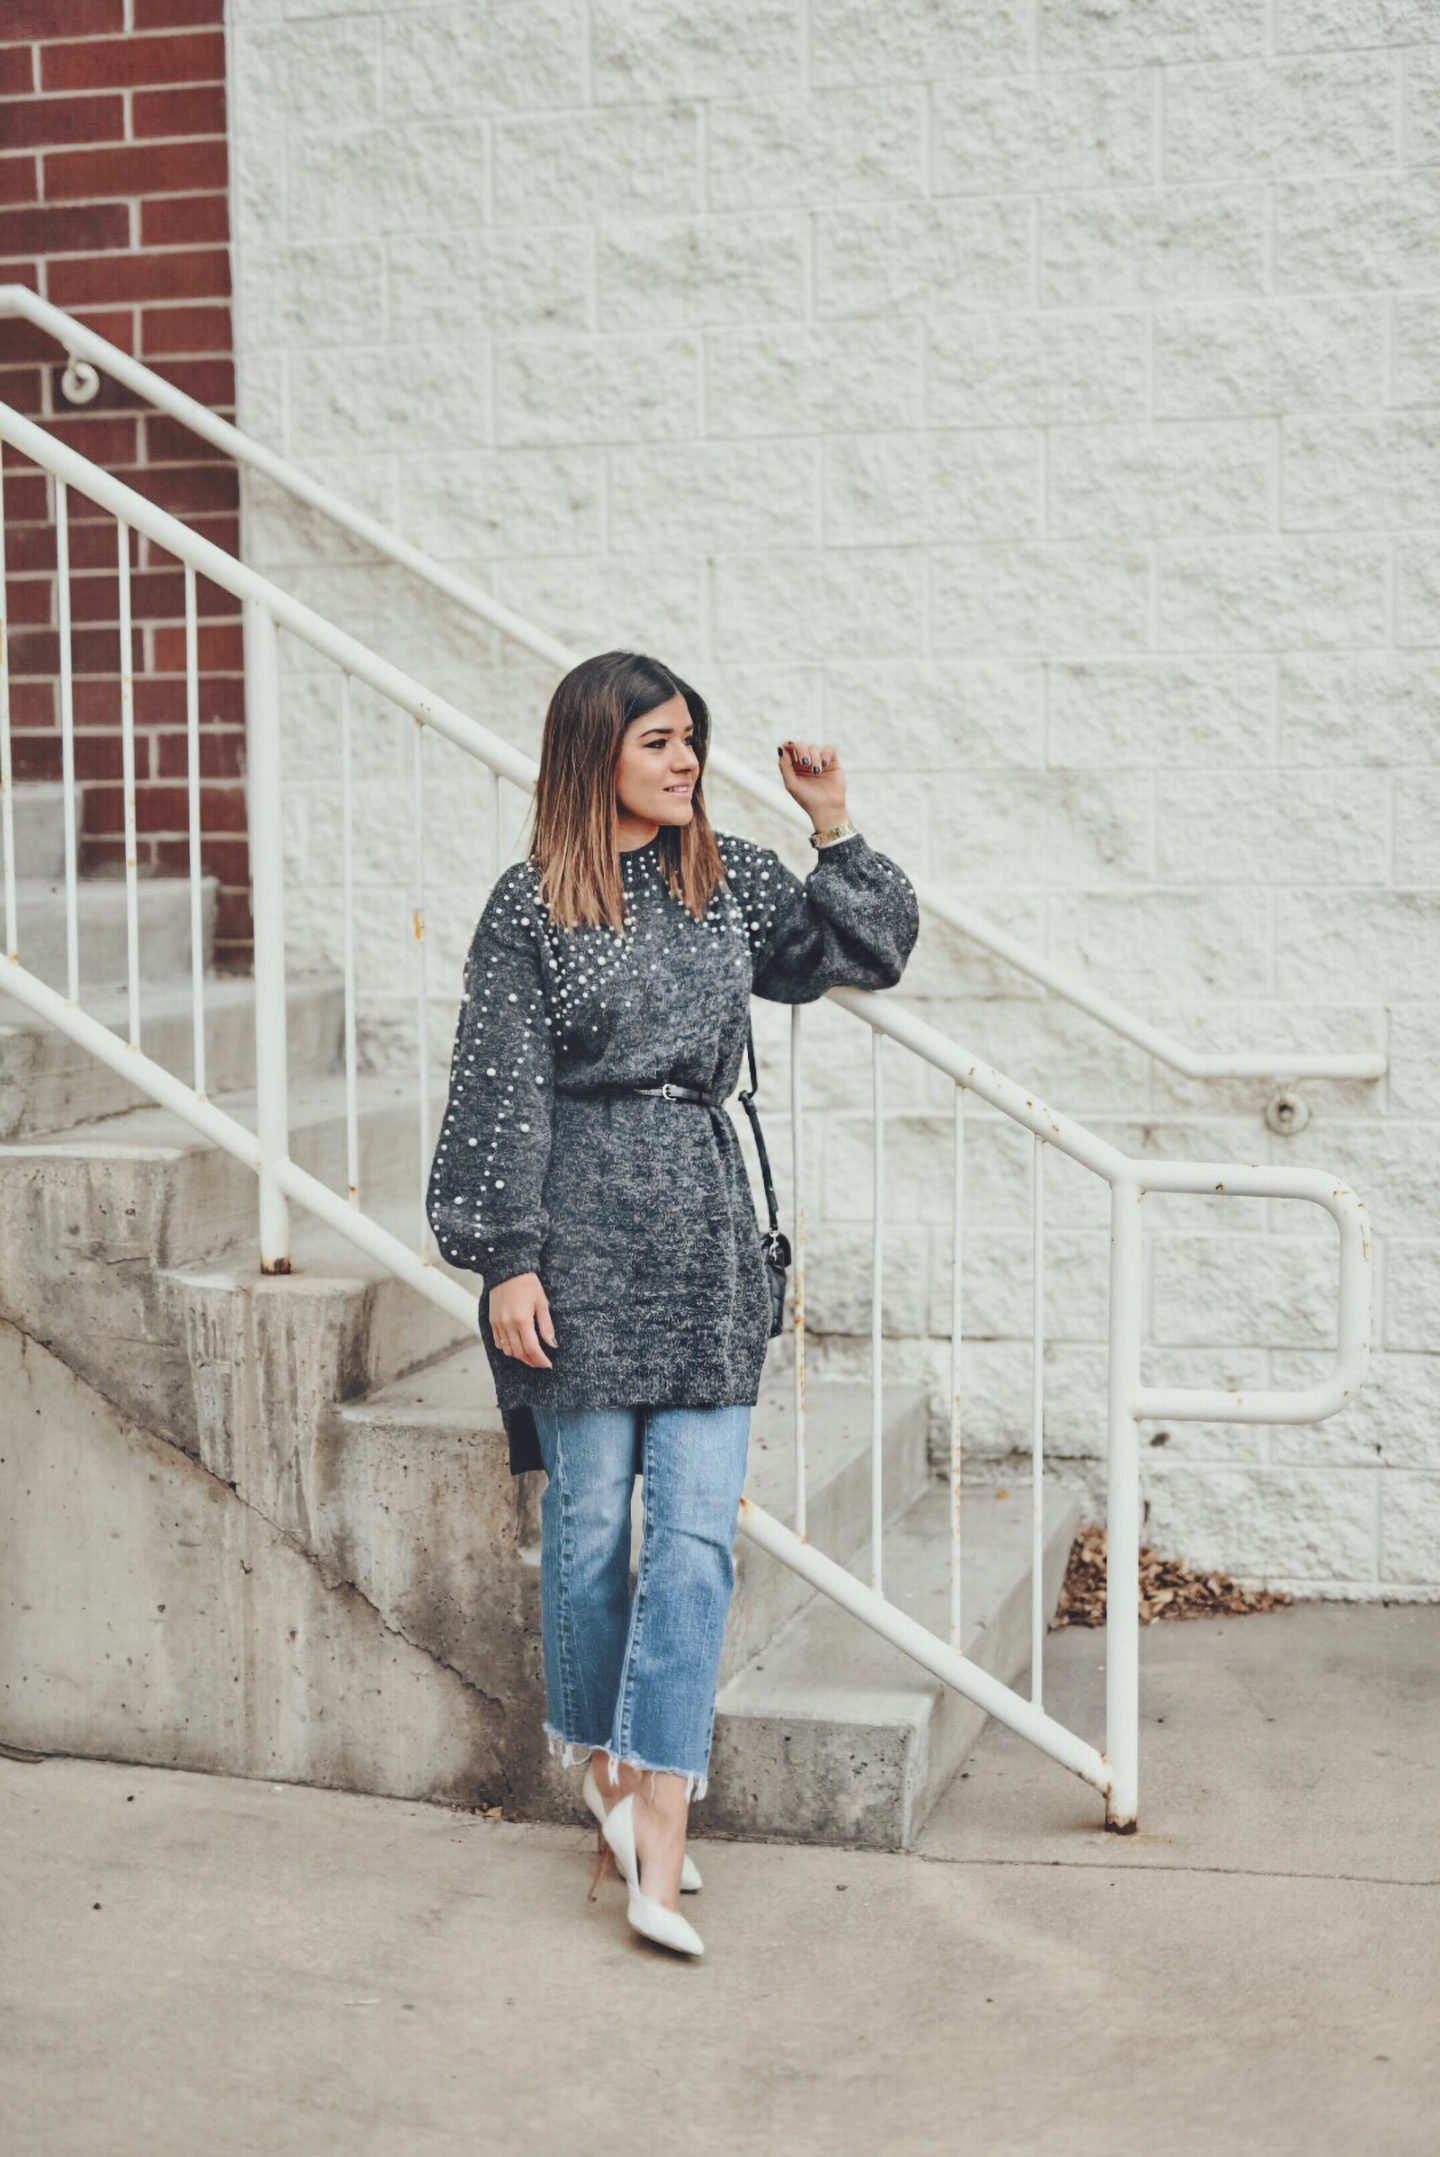 HOW TO STYLE SWEATER DRESSES WITH JEANS, chictalk | CHIC TALK